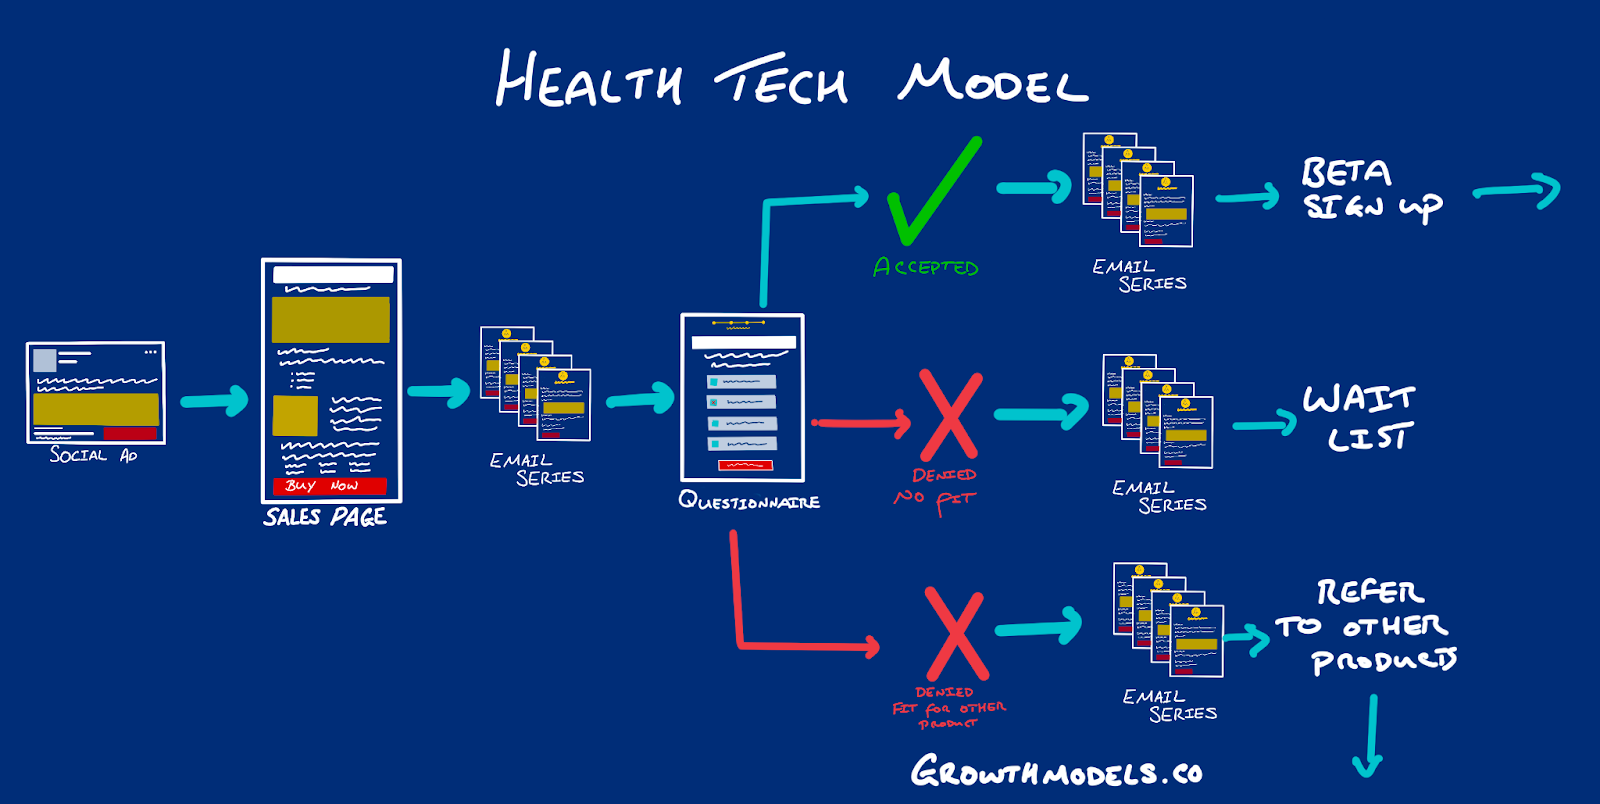 The model used to generate 7000 users for a new health tech offer.  